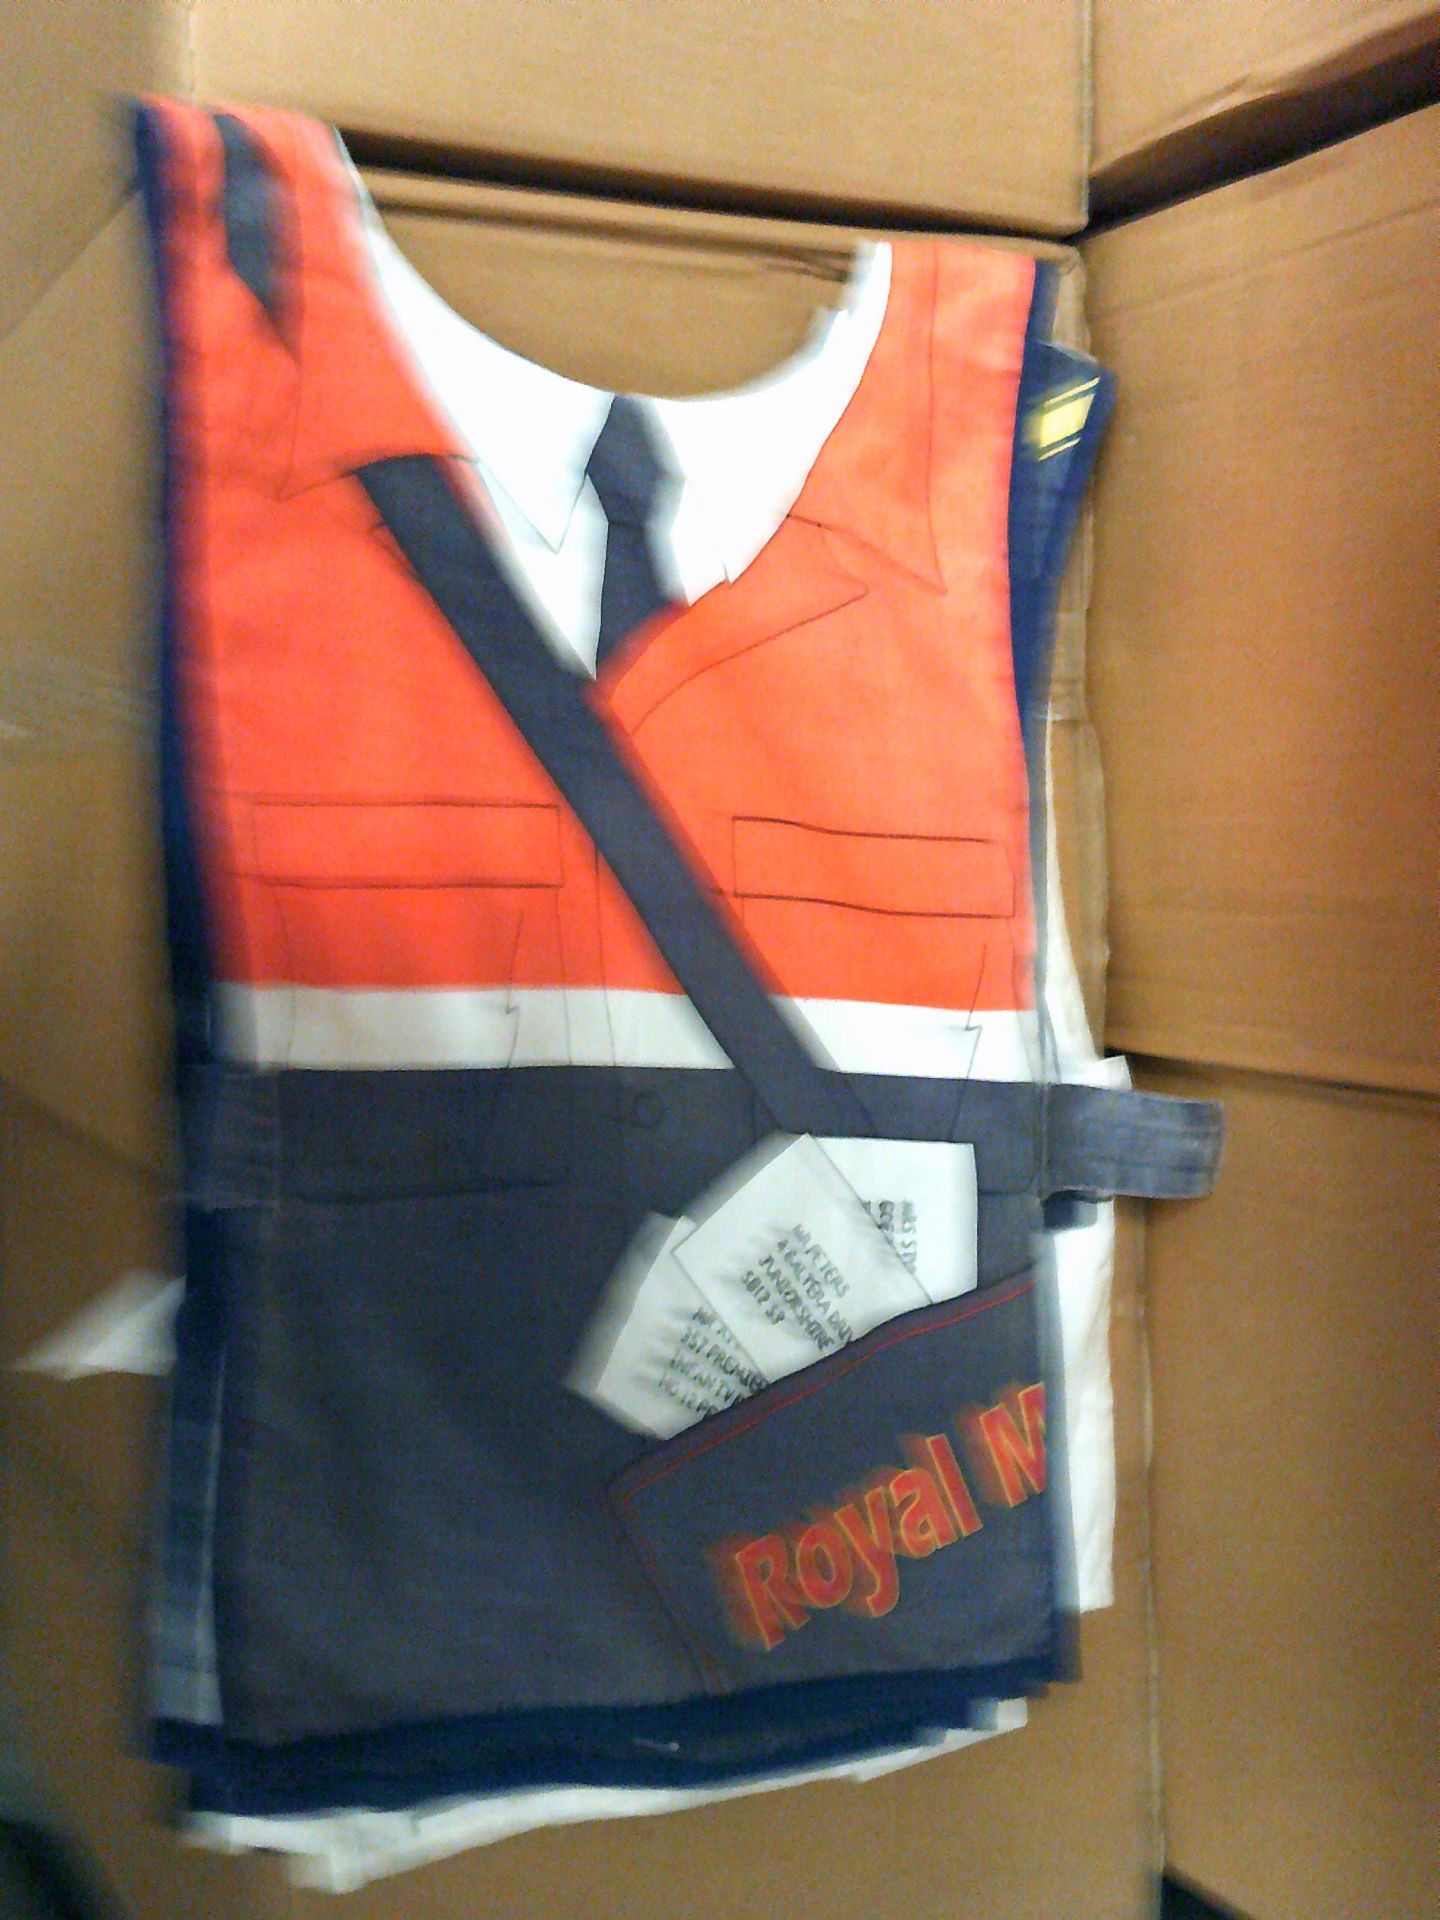 * 4 x childresn dress up tabards - Image 4 of 4